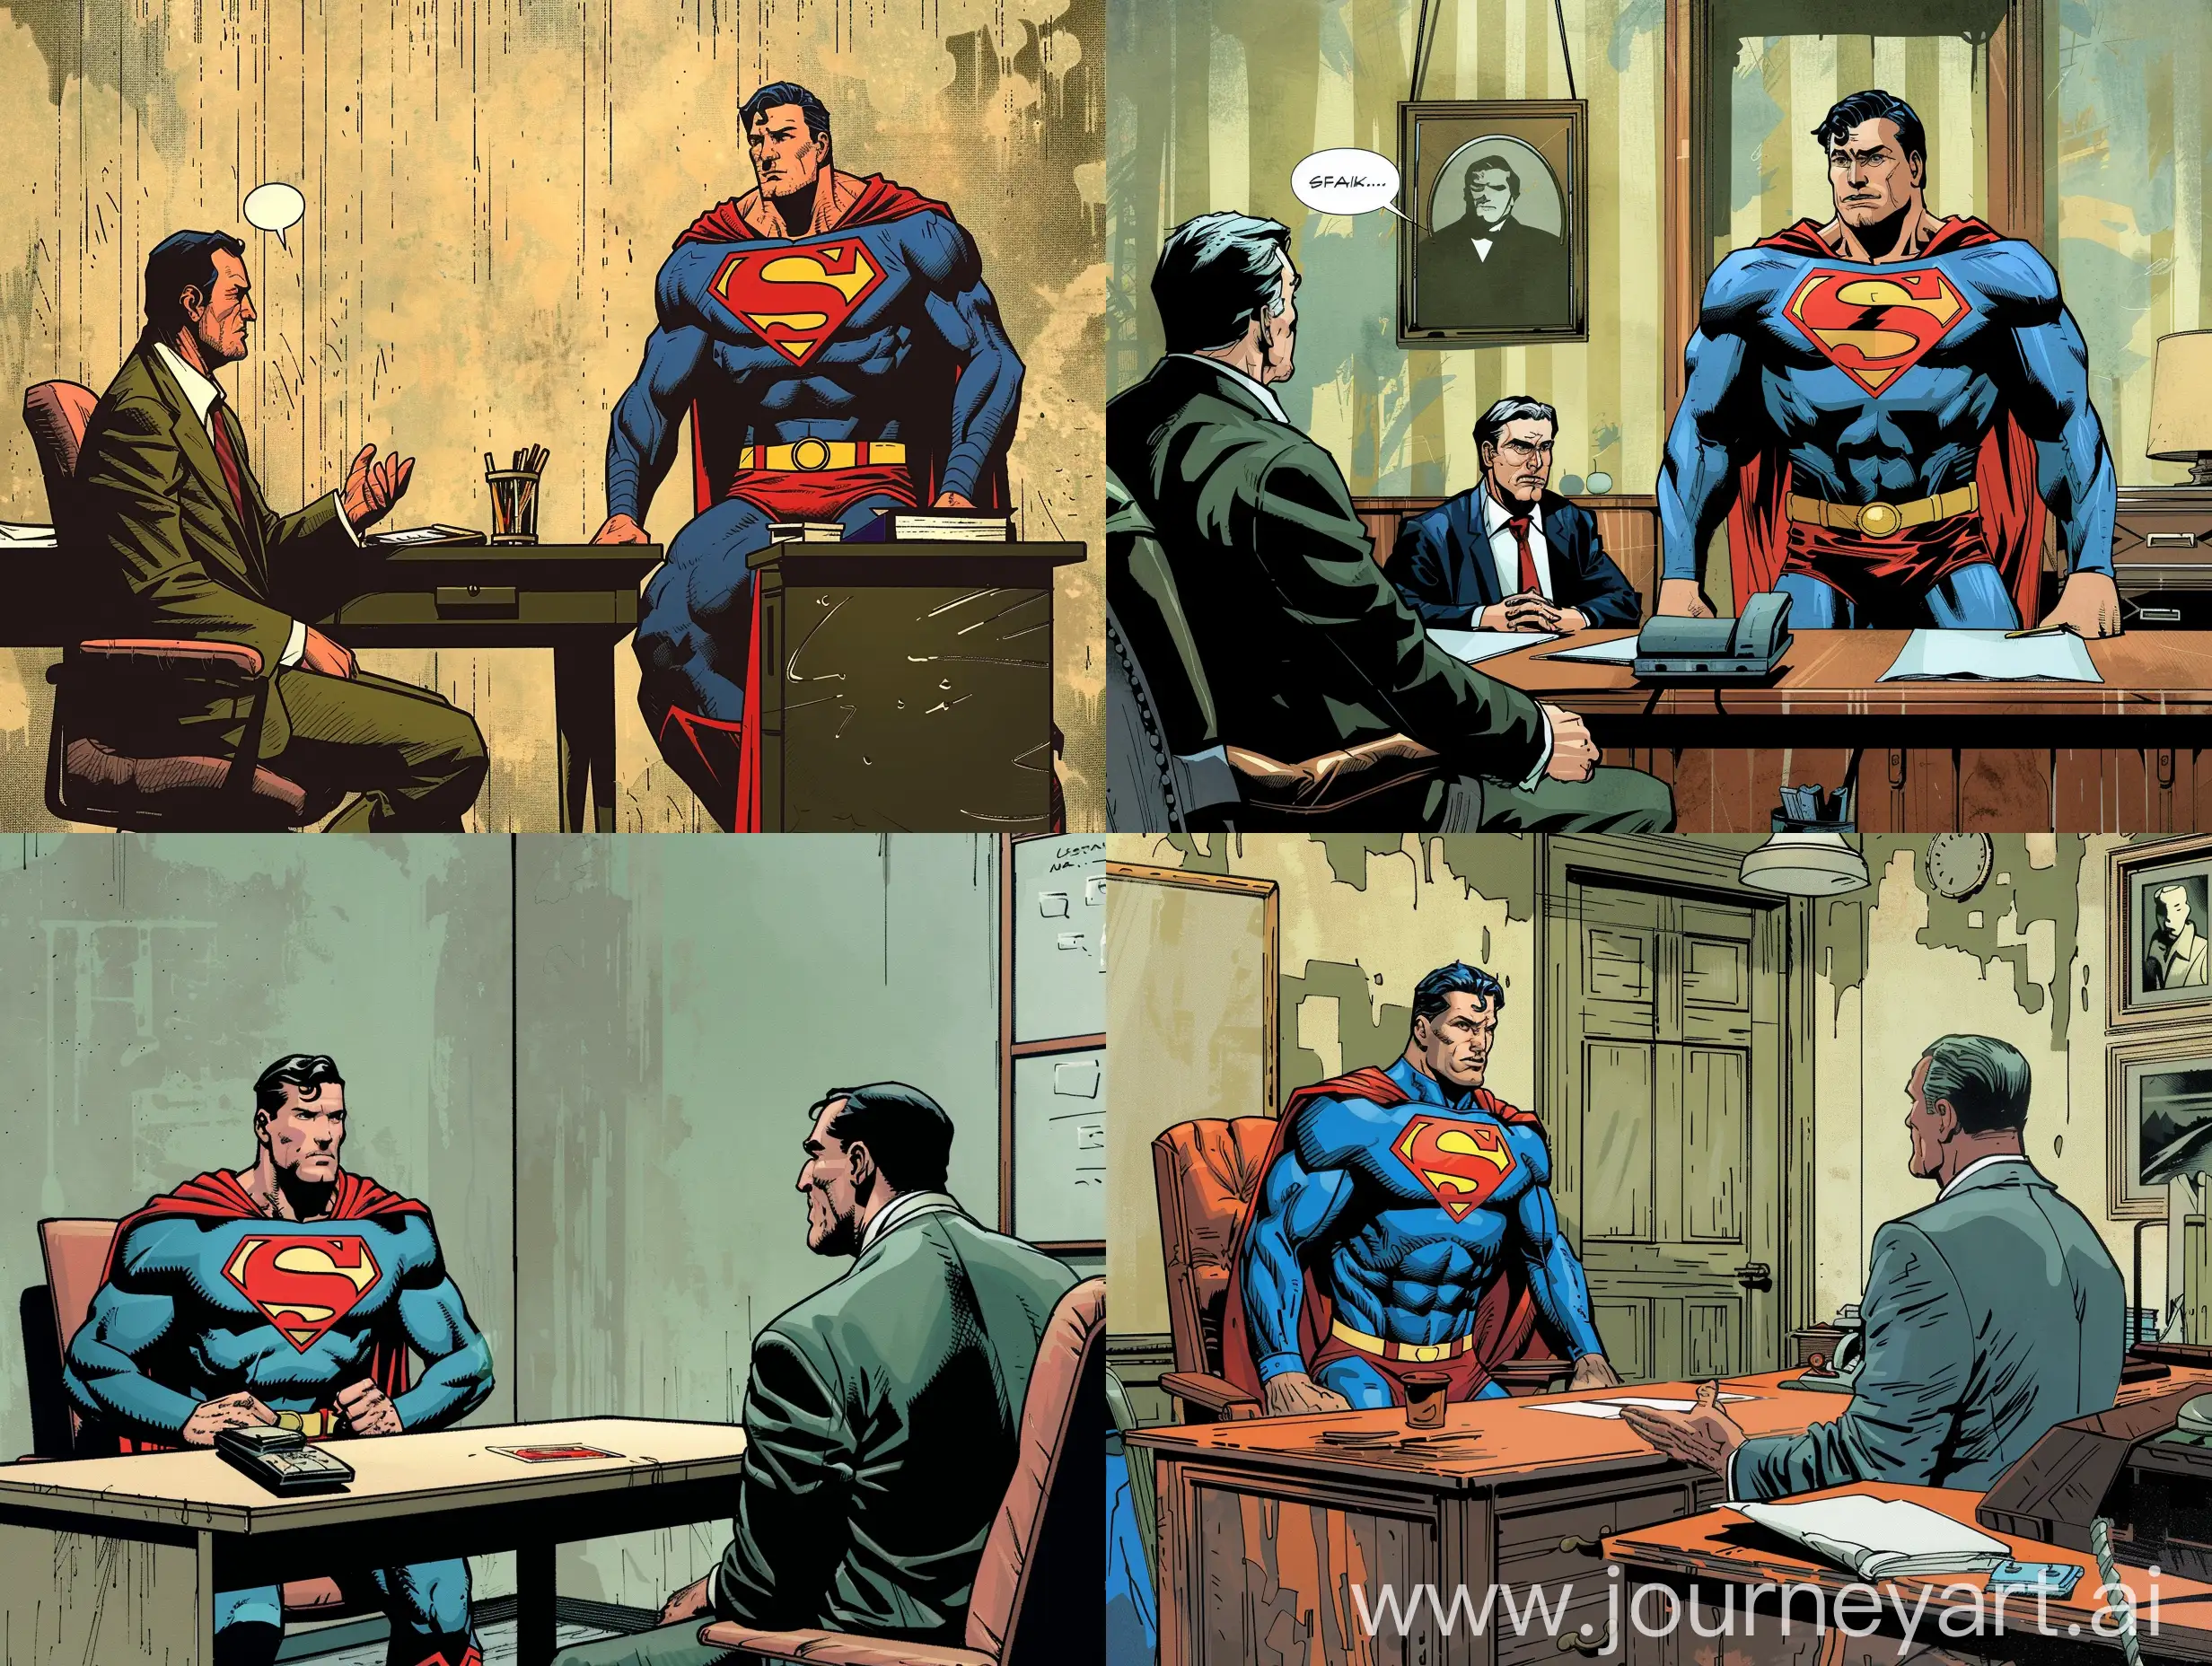 superman without logo, conversation with man in suit, office setting, man in suit asks question, superman sitting behind desk,man in suit sitting on chair,casual,grunge comic style --v 6 --ar 4:3